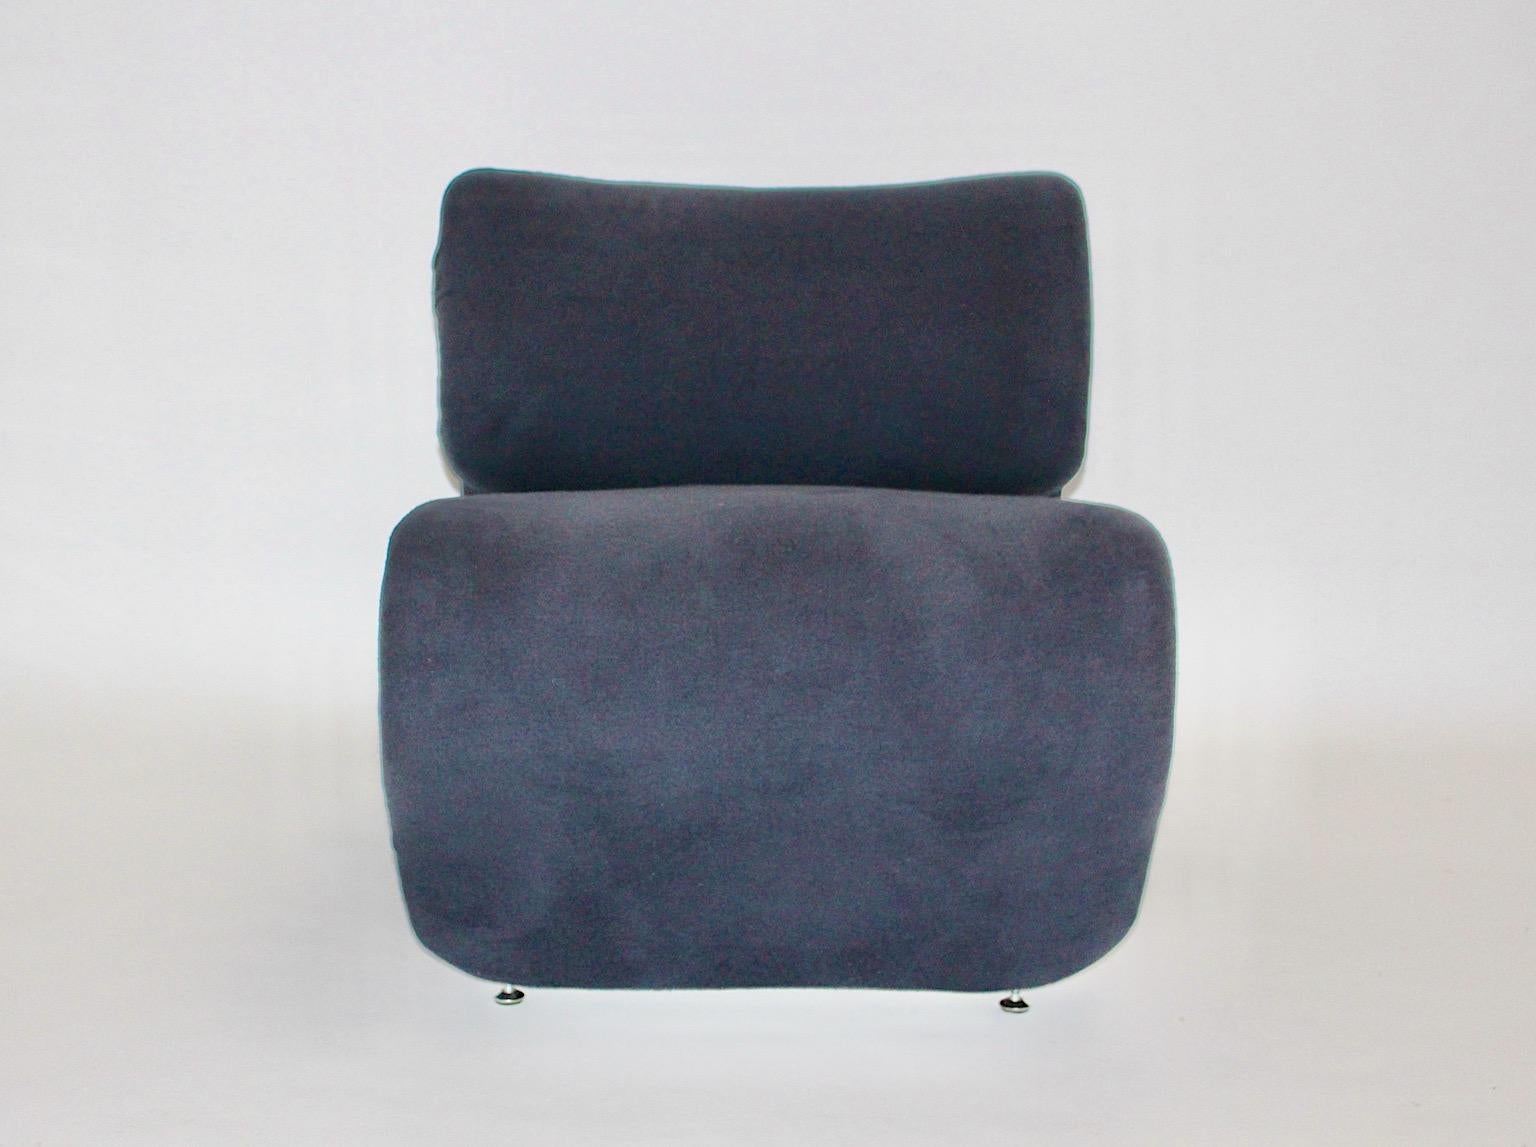 Sculptural Space Age Vintage Blue Lounge Chair Etcetera Jan Ekselius, 1970s In Good Condition For Sale In Vienna, AT